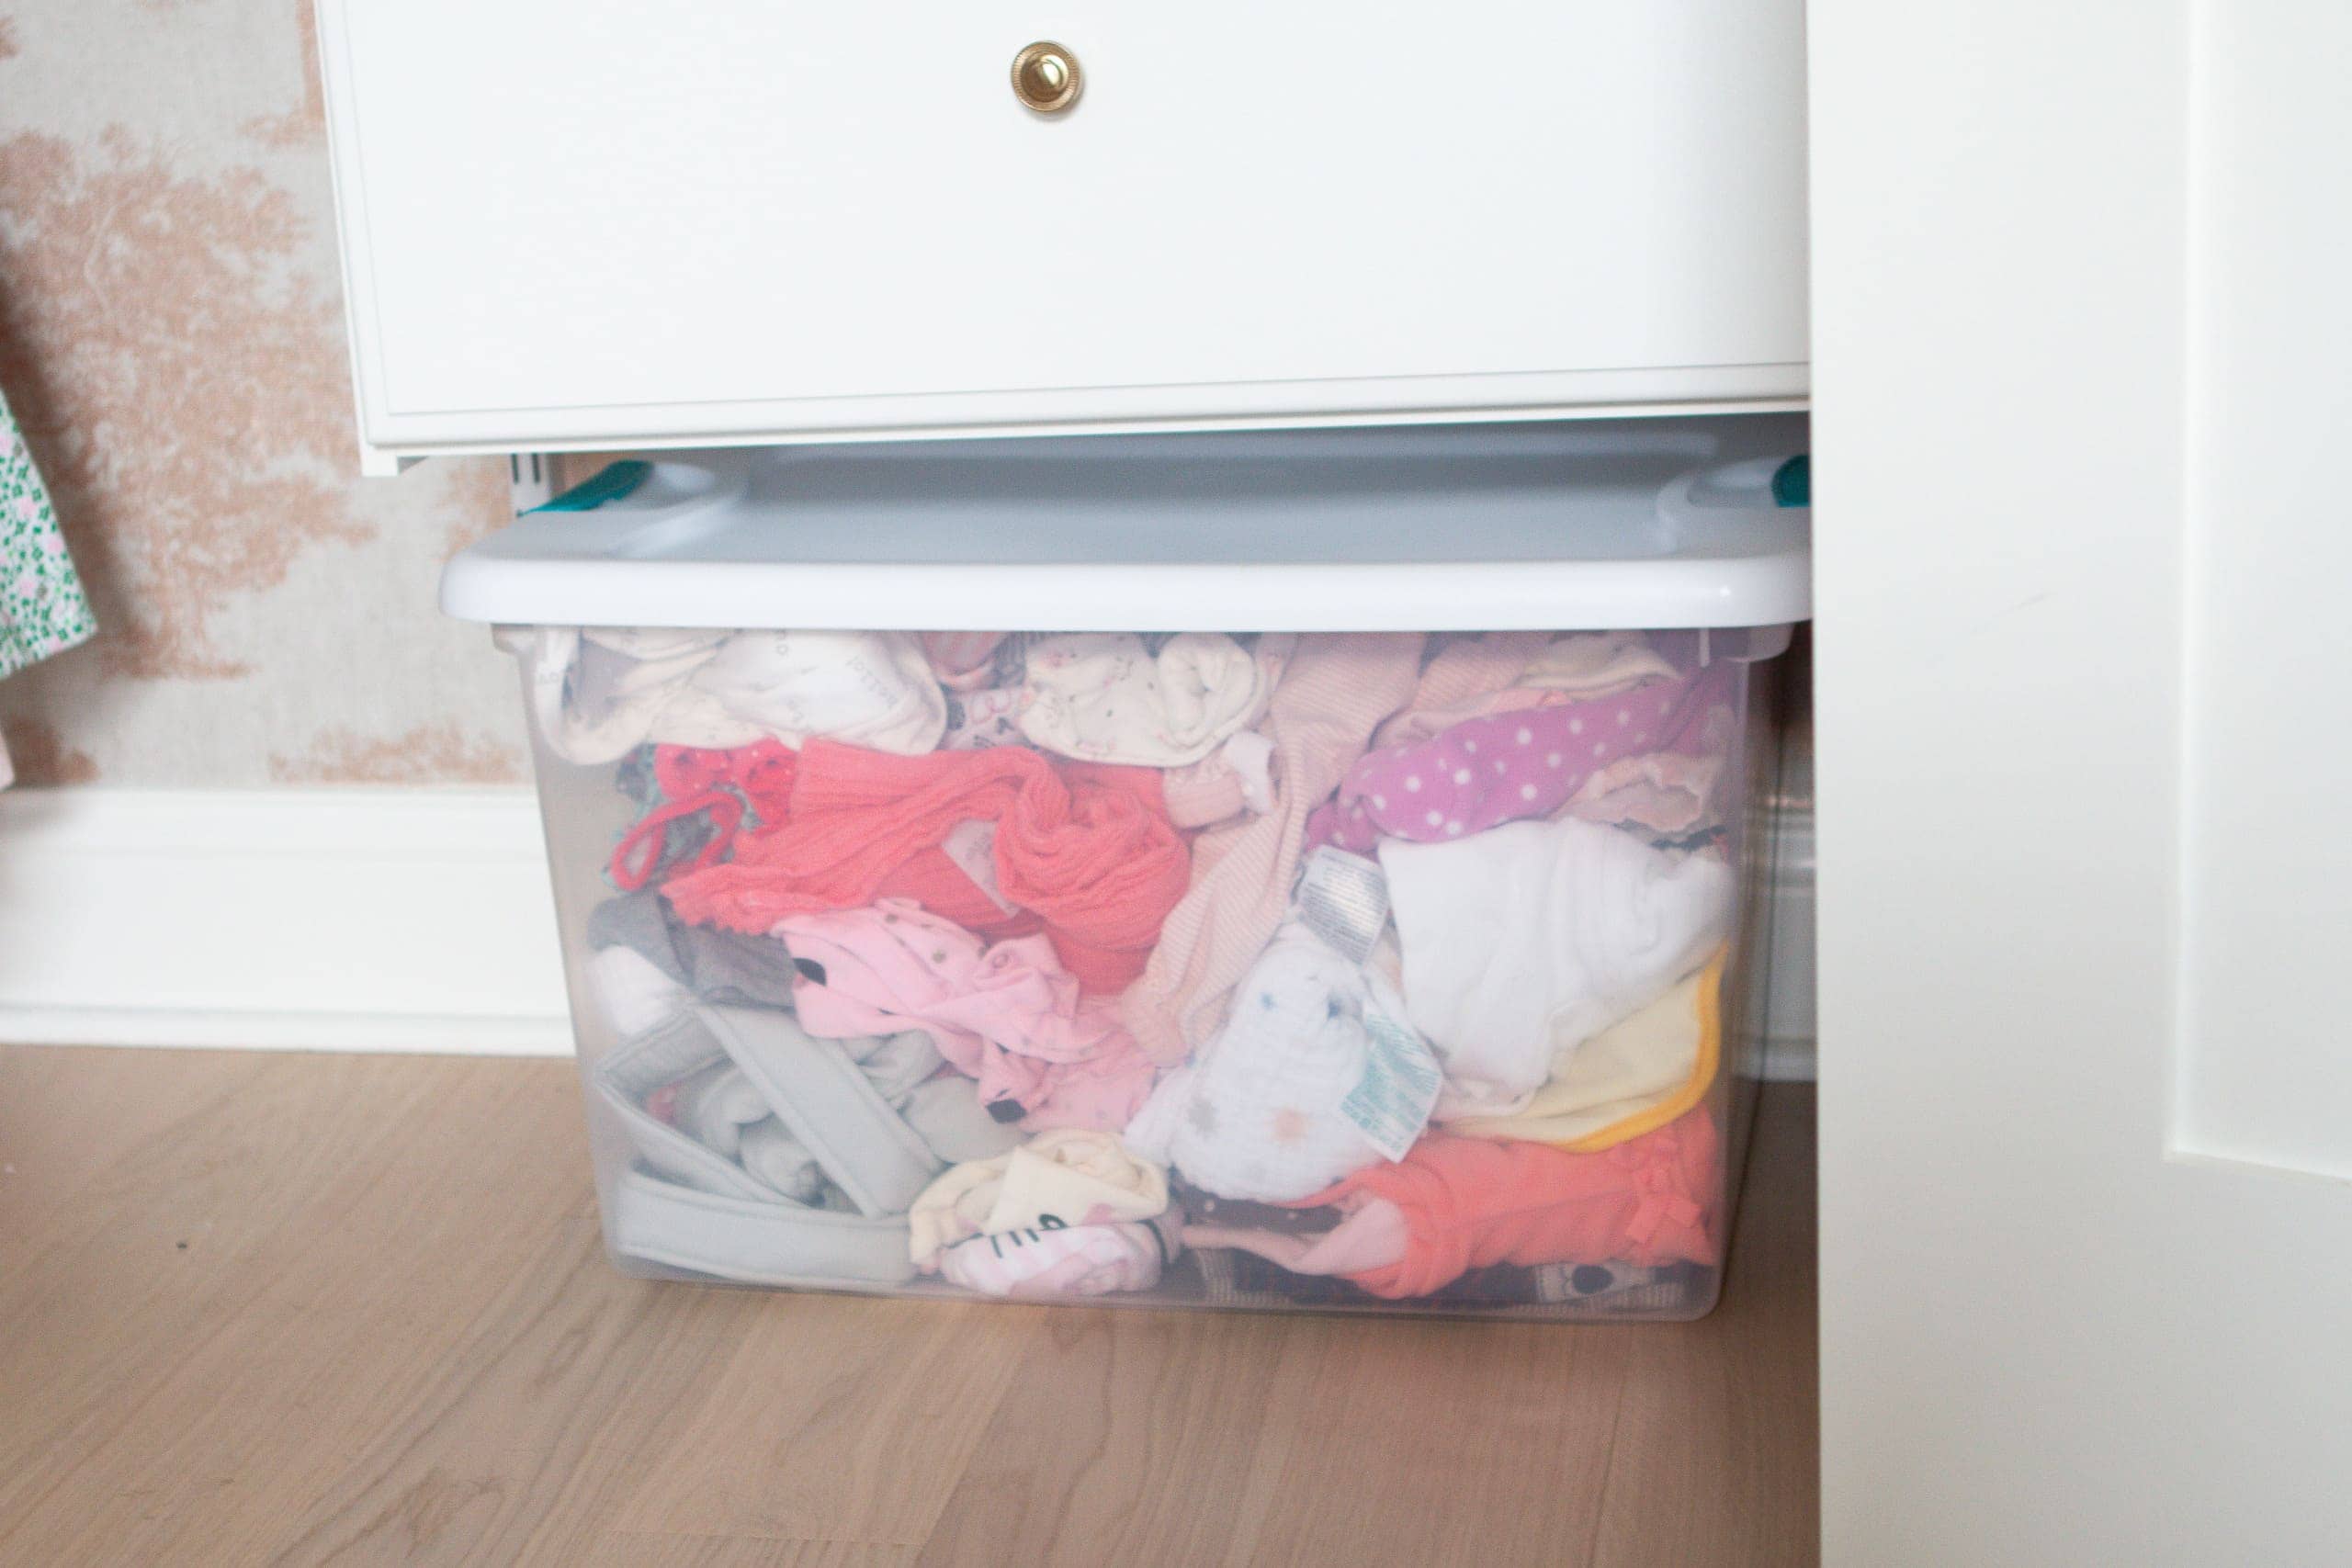 Keep a clear bin in the closet to hold clothing that no longer fits